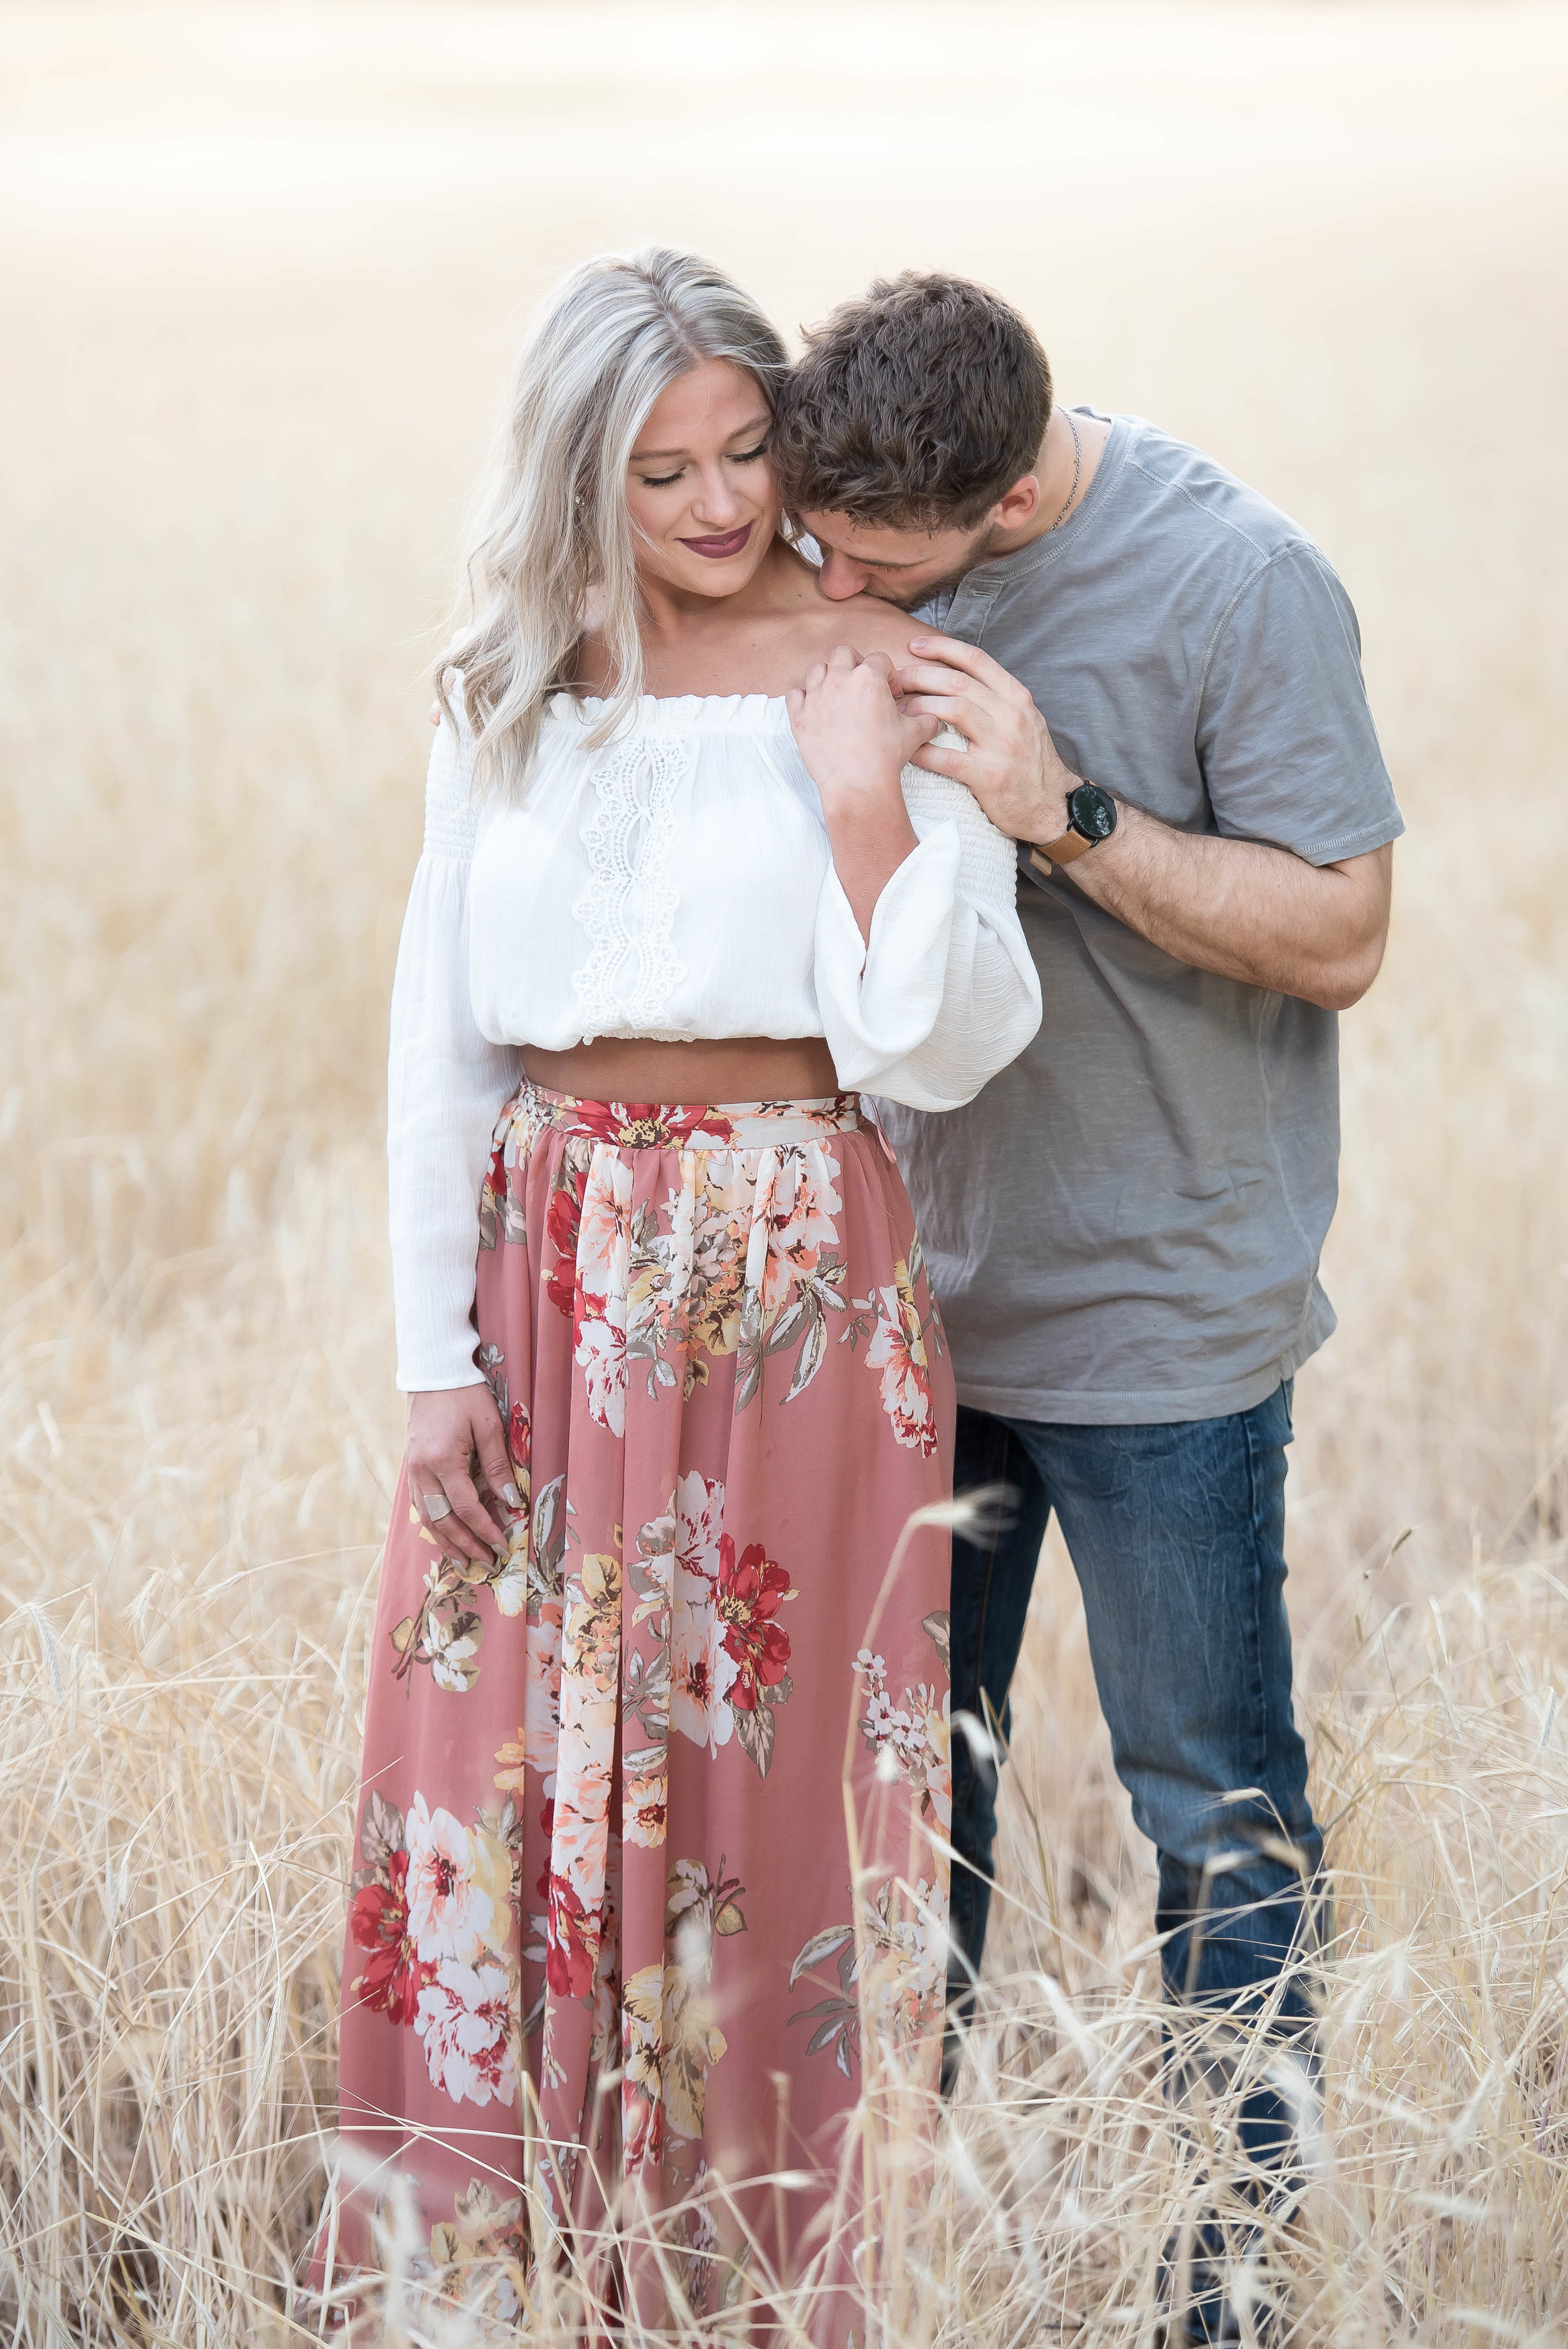 Couple Session - Fitness Couples - Tall Grass Field - Engagement Portrait Ideas - Engagement Session Ideas - Couple Session Ideas - Spring Picture Ideas-5.jpg